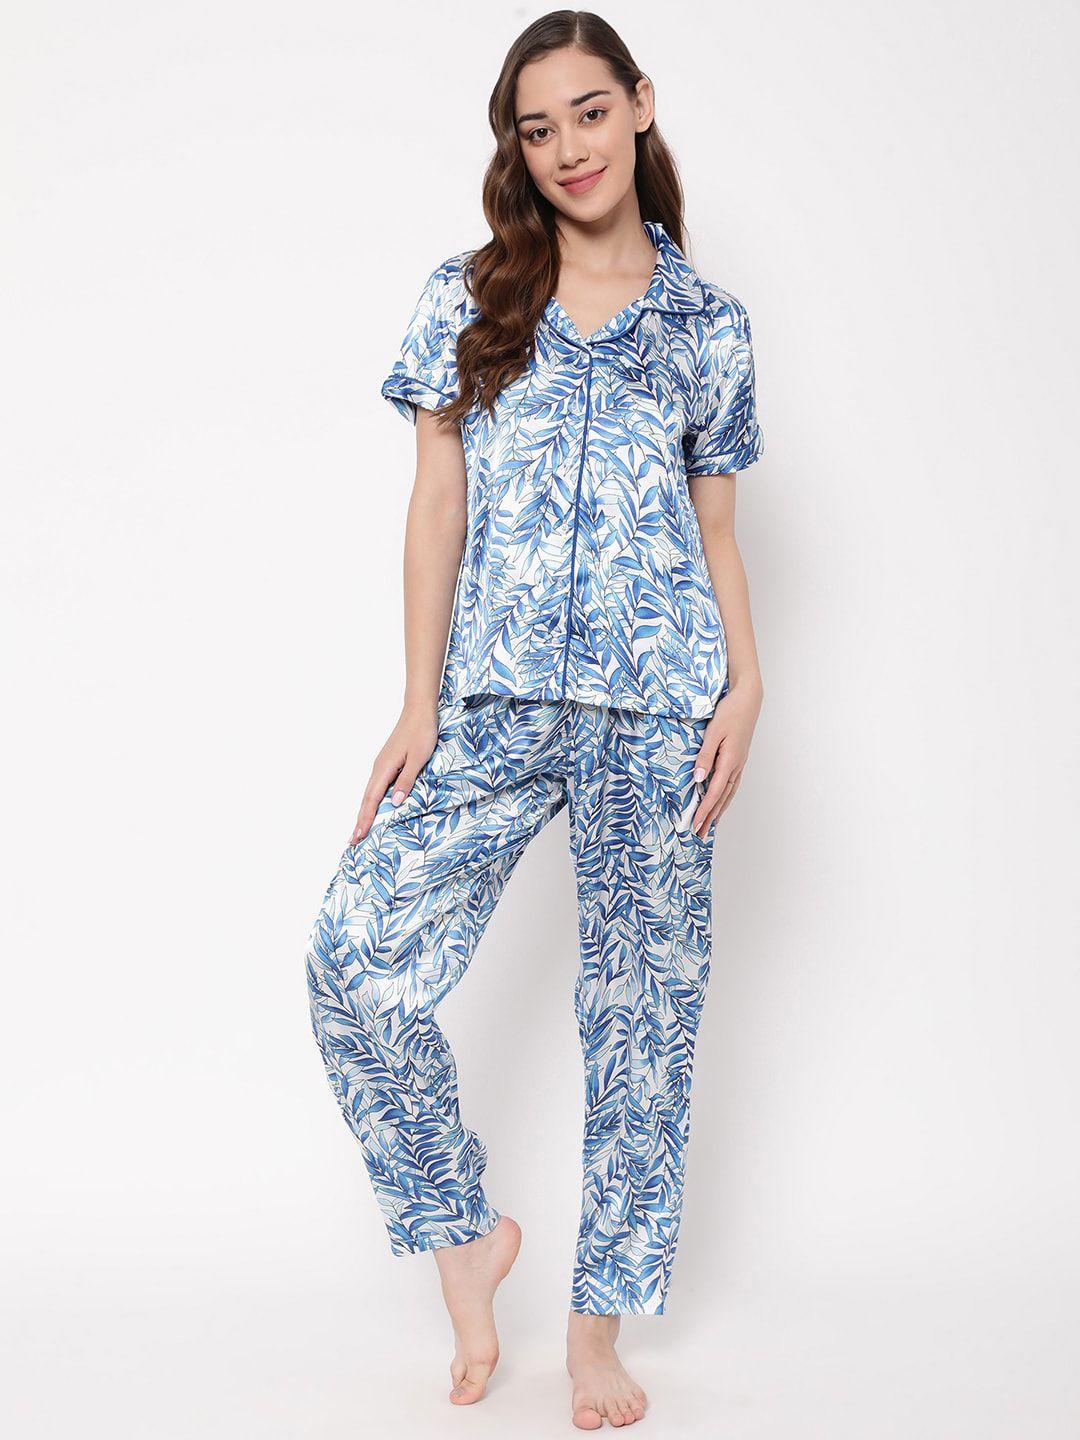 clovia floral printed lapel collar top with trouser night suit